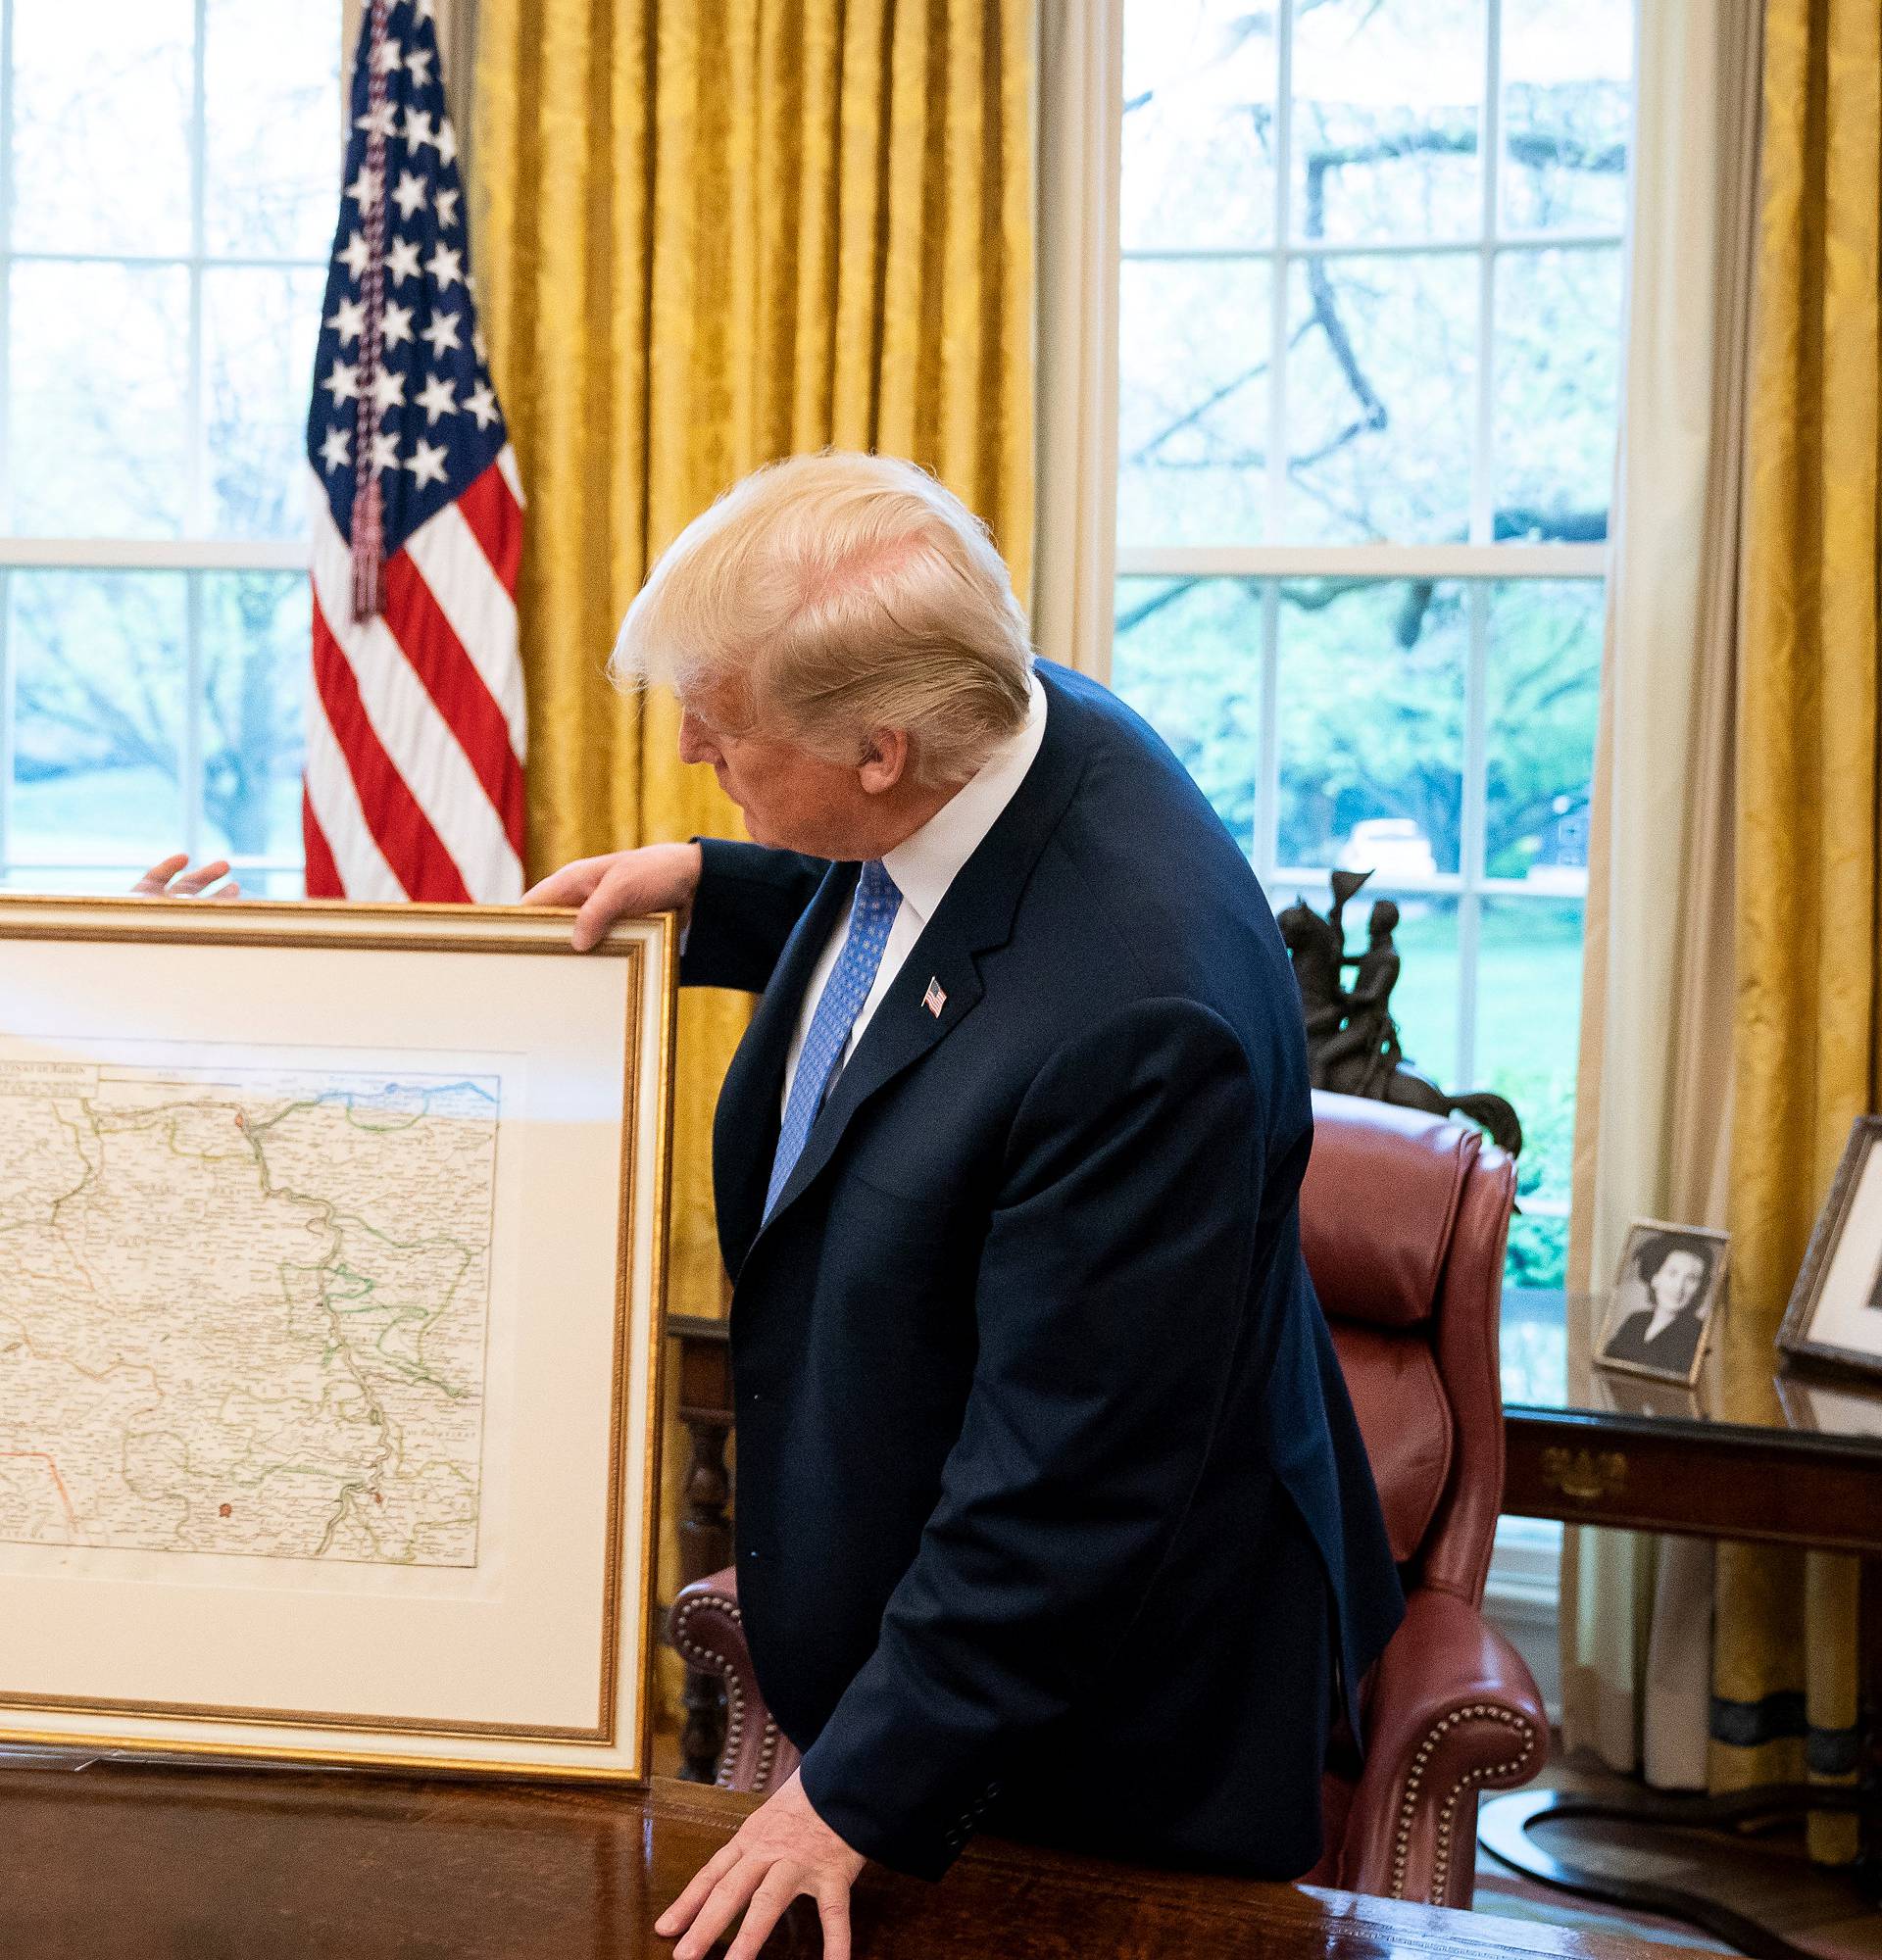 U.S. President Donald Trump receives from German Chancellor Angela Merkel a historical map of the Germany's region Rhenish Palatinate from 1705 at the White House in Washington